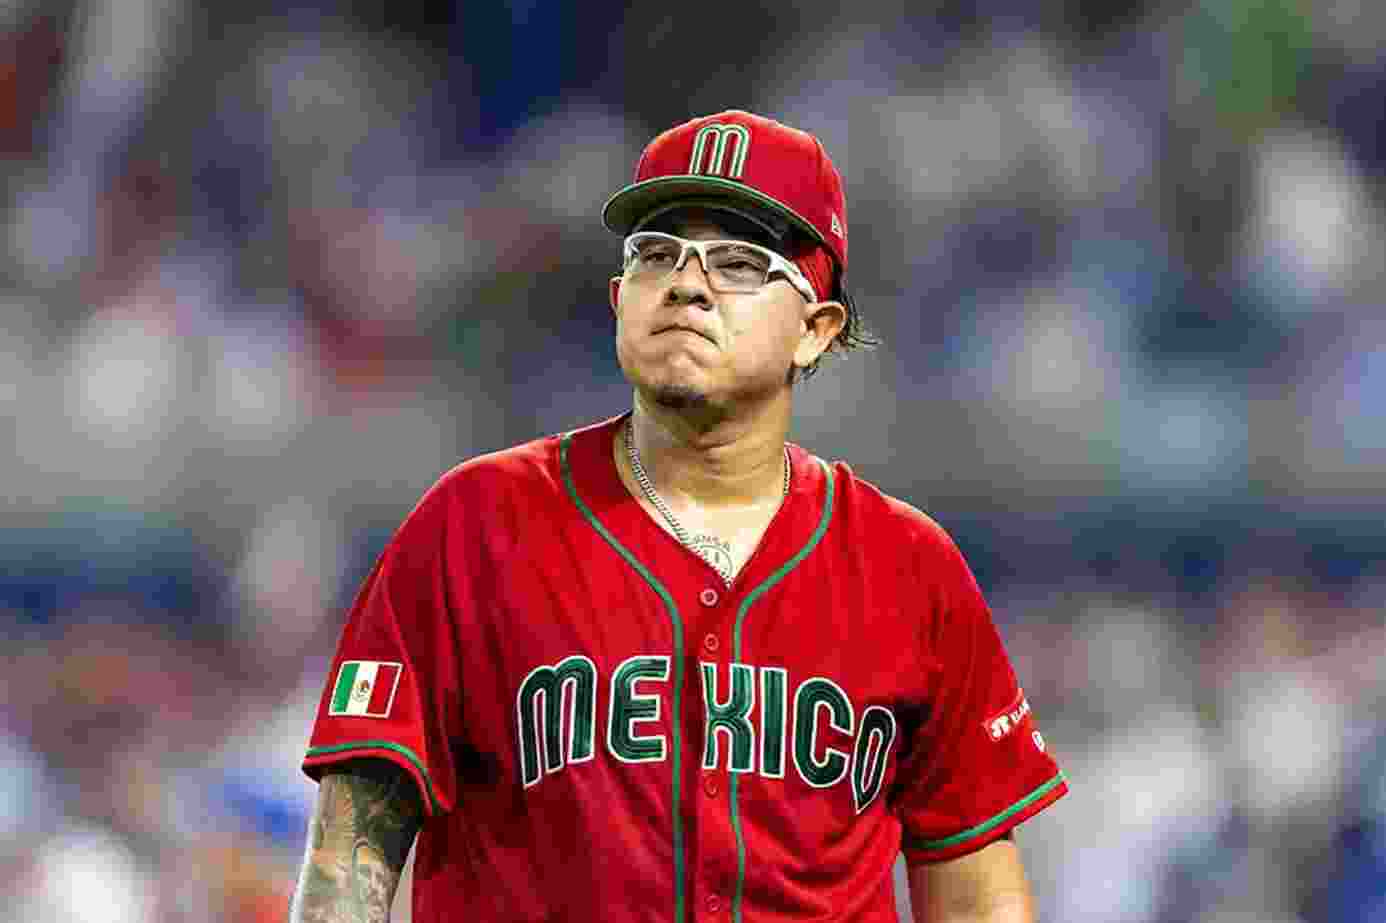 Julio urias' Personal Life, Siblings, Parents, Wife, Kids And Family »